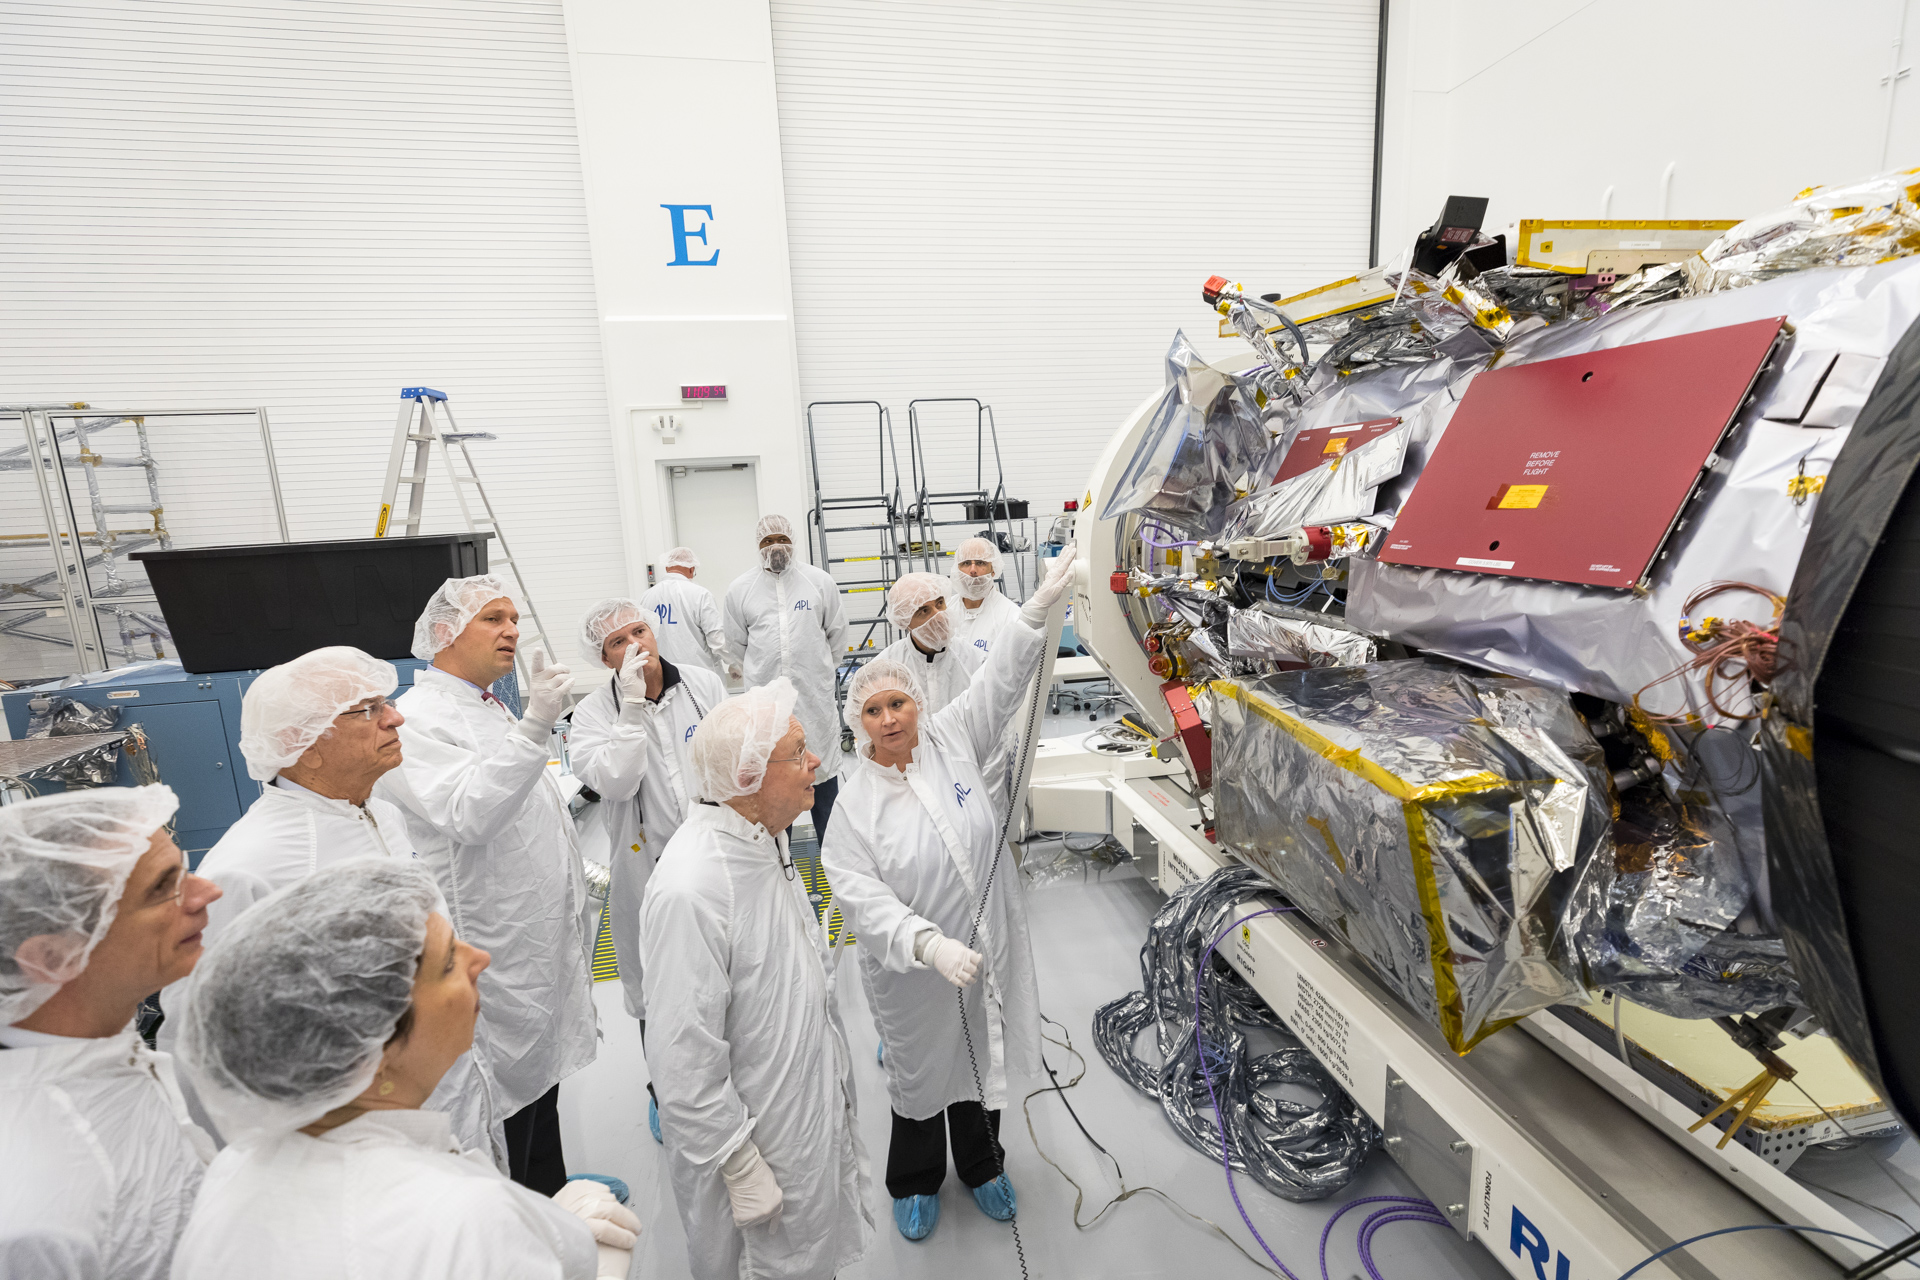 Eugene Parker, professor emeritus at the University of Chicago, visiting the spacecraft that bears his name: NASA’s Parker Solar Probe.  Engineers in the clean room at the Johns Hopkins Applied Physics Laboratory in Laurel, Maryland, where the probe was designed and is being built point out the instruments that will collect data as the mission travels directly through the Sun’s atmosphere. 